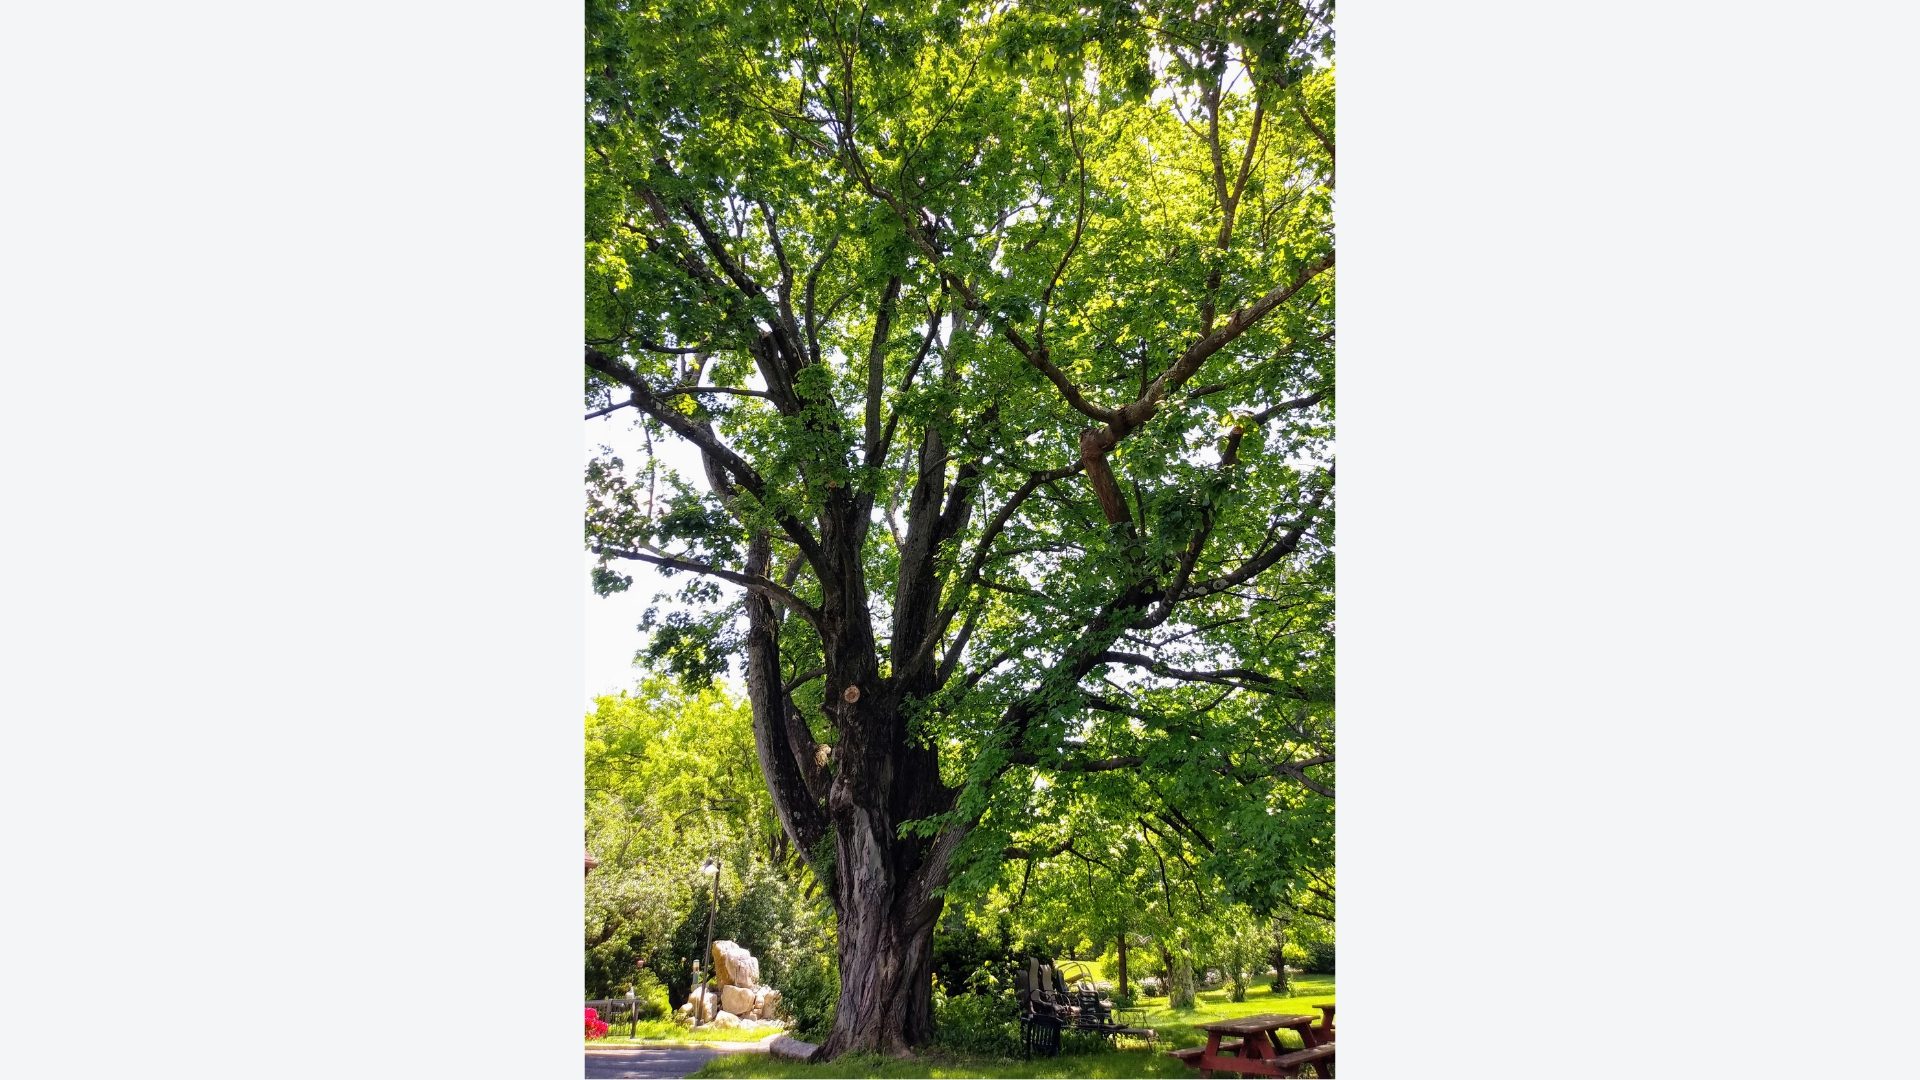 A large tree with green leaves in the middle of a park.